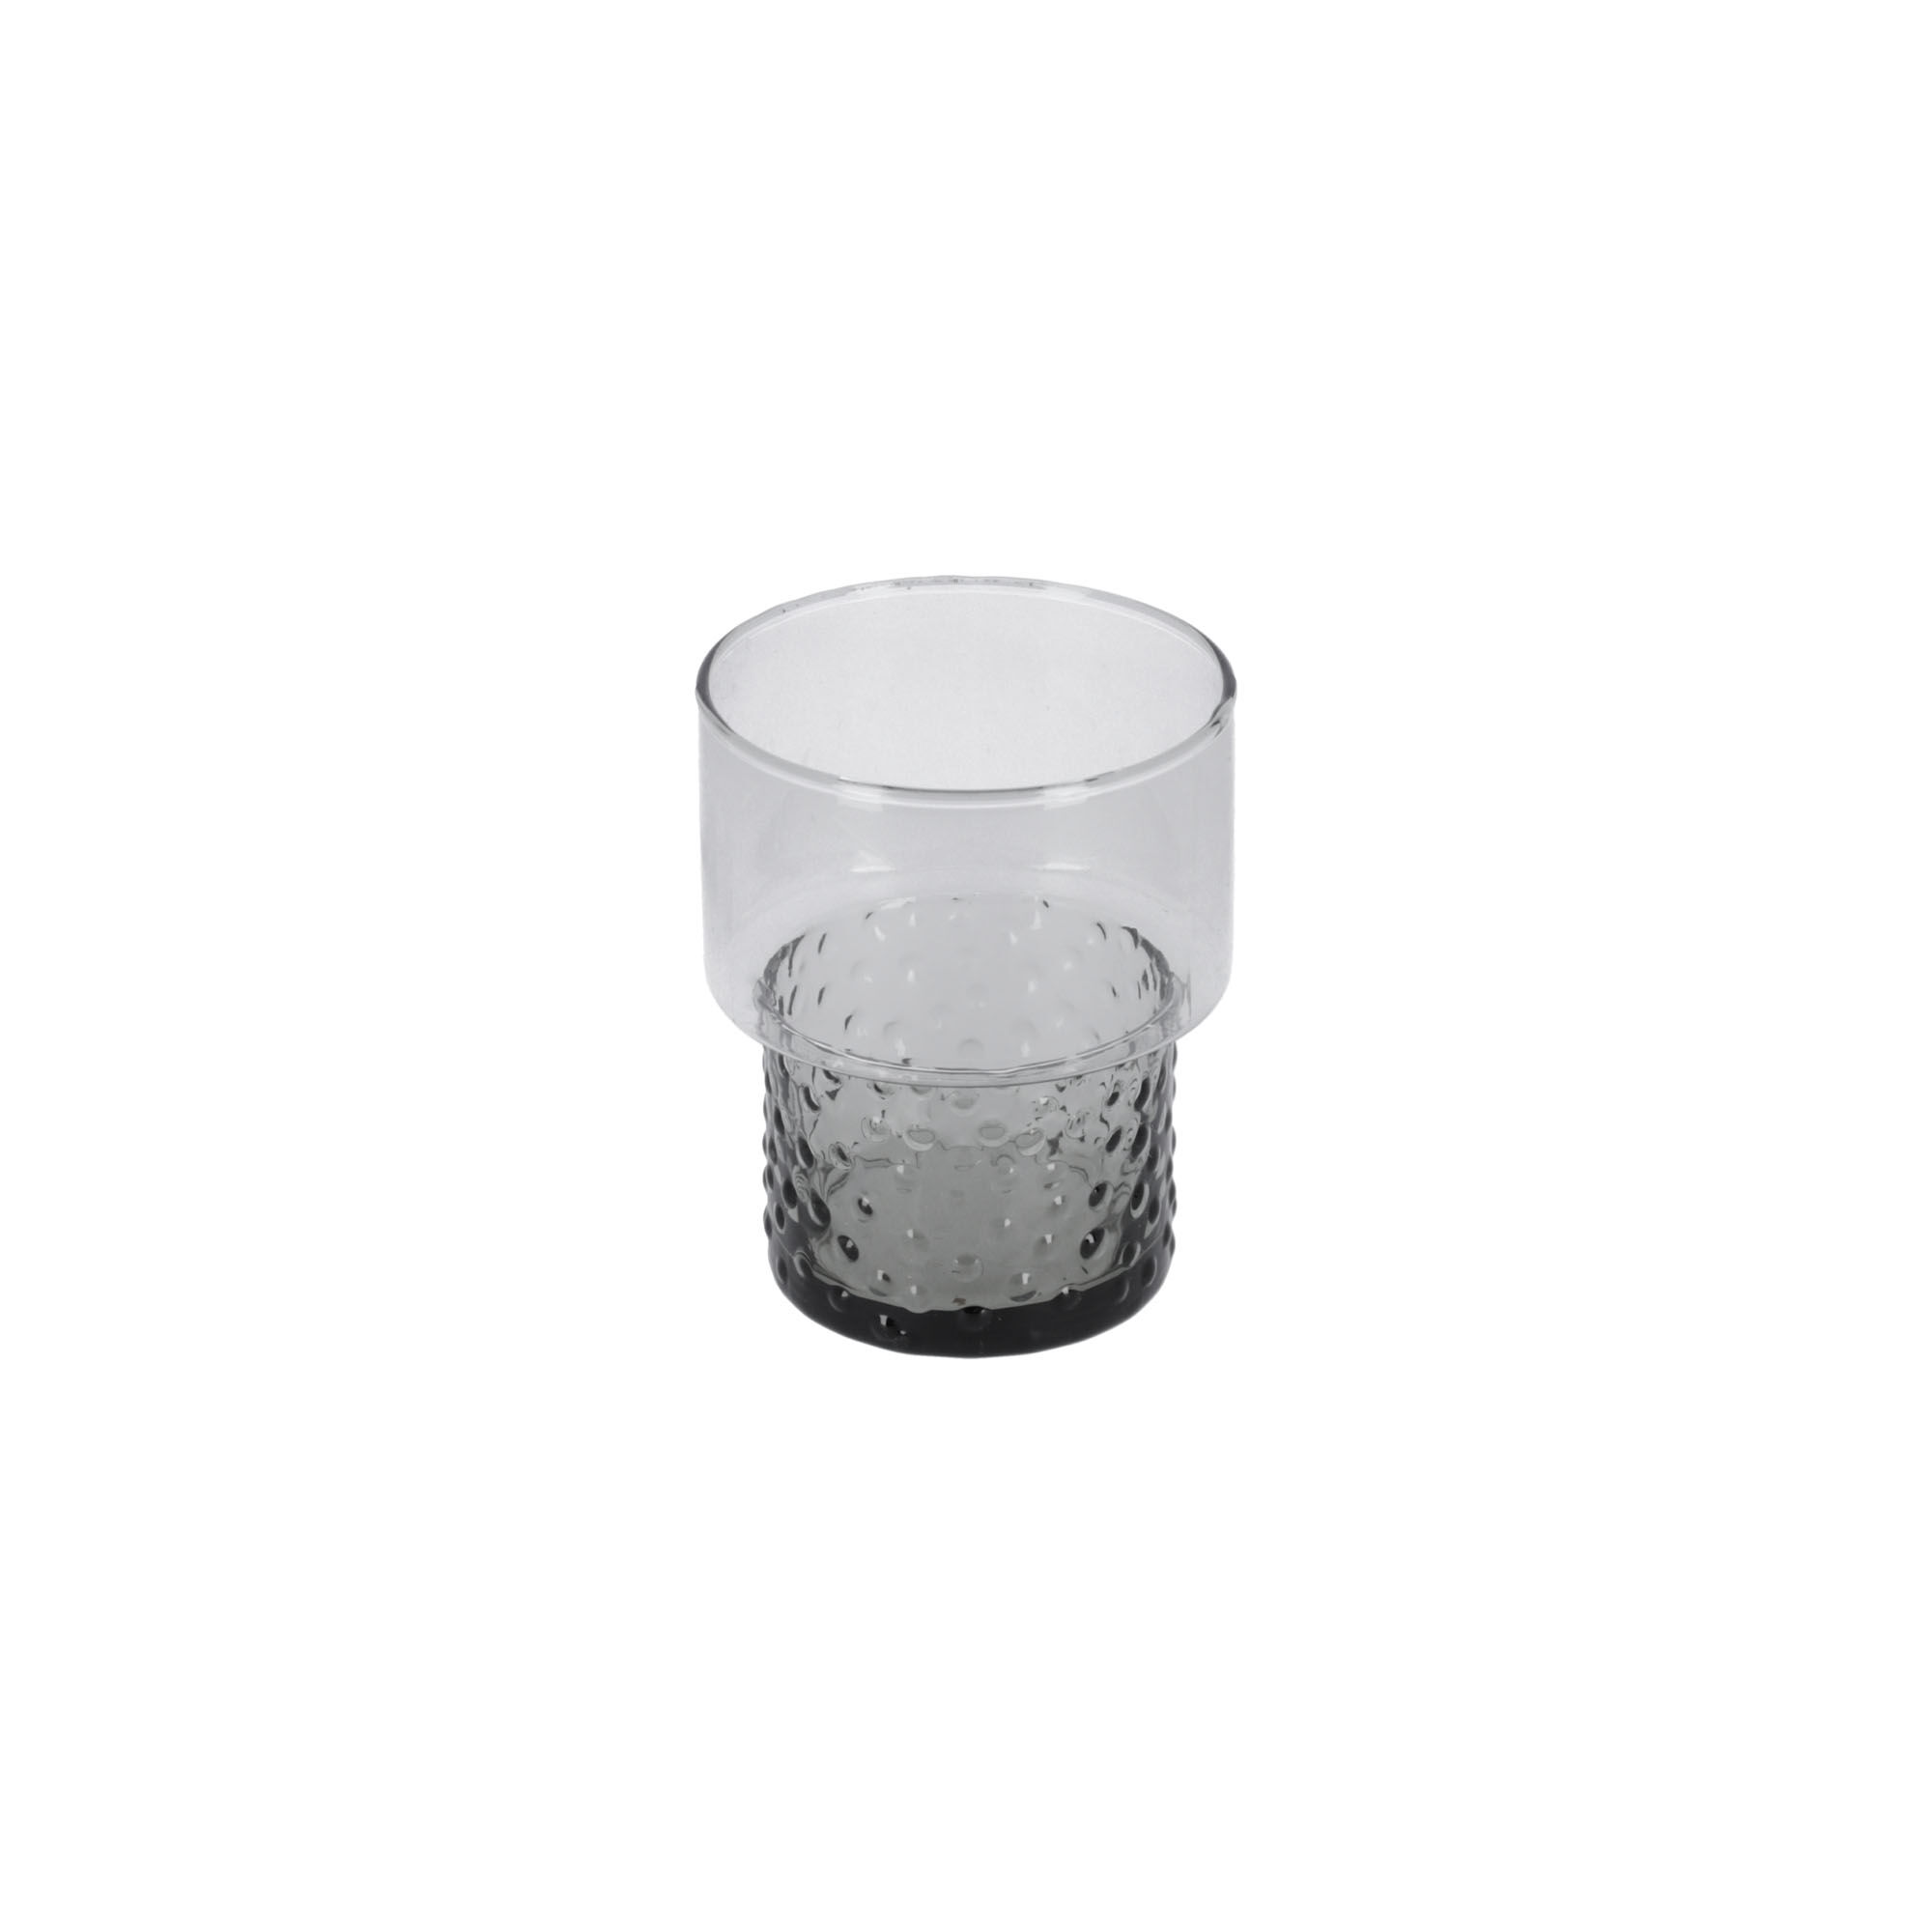 Kave Home Small Syna glass